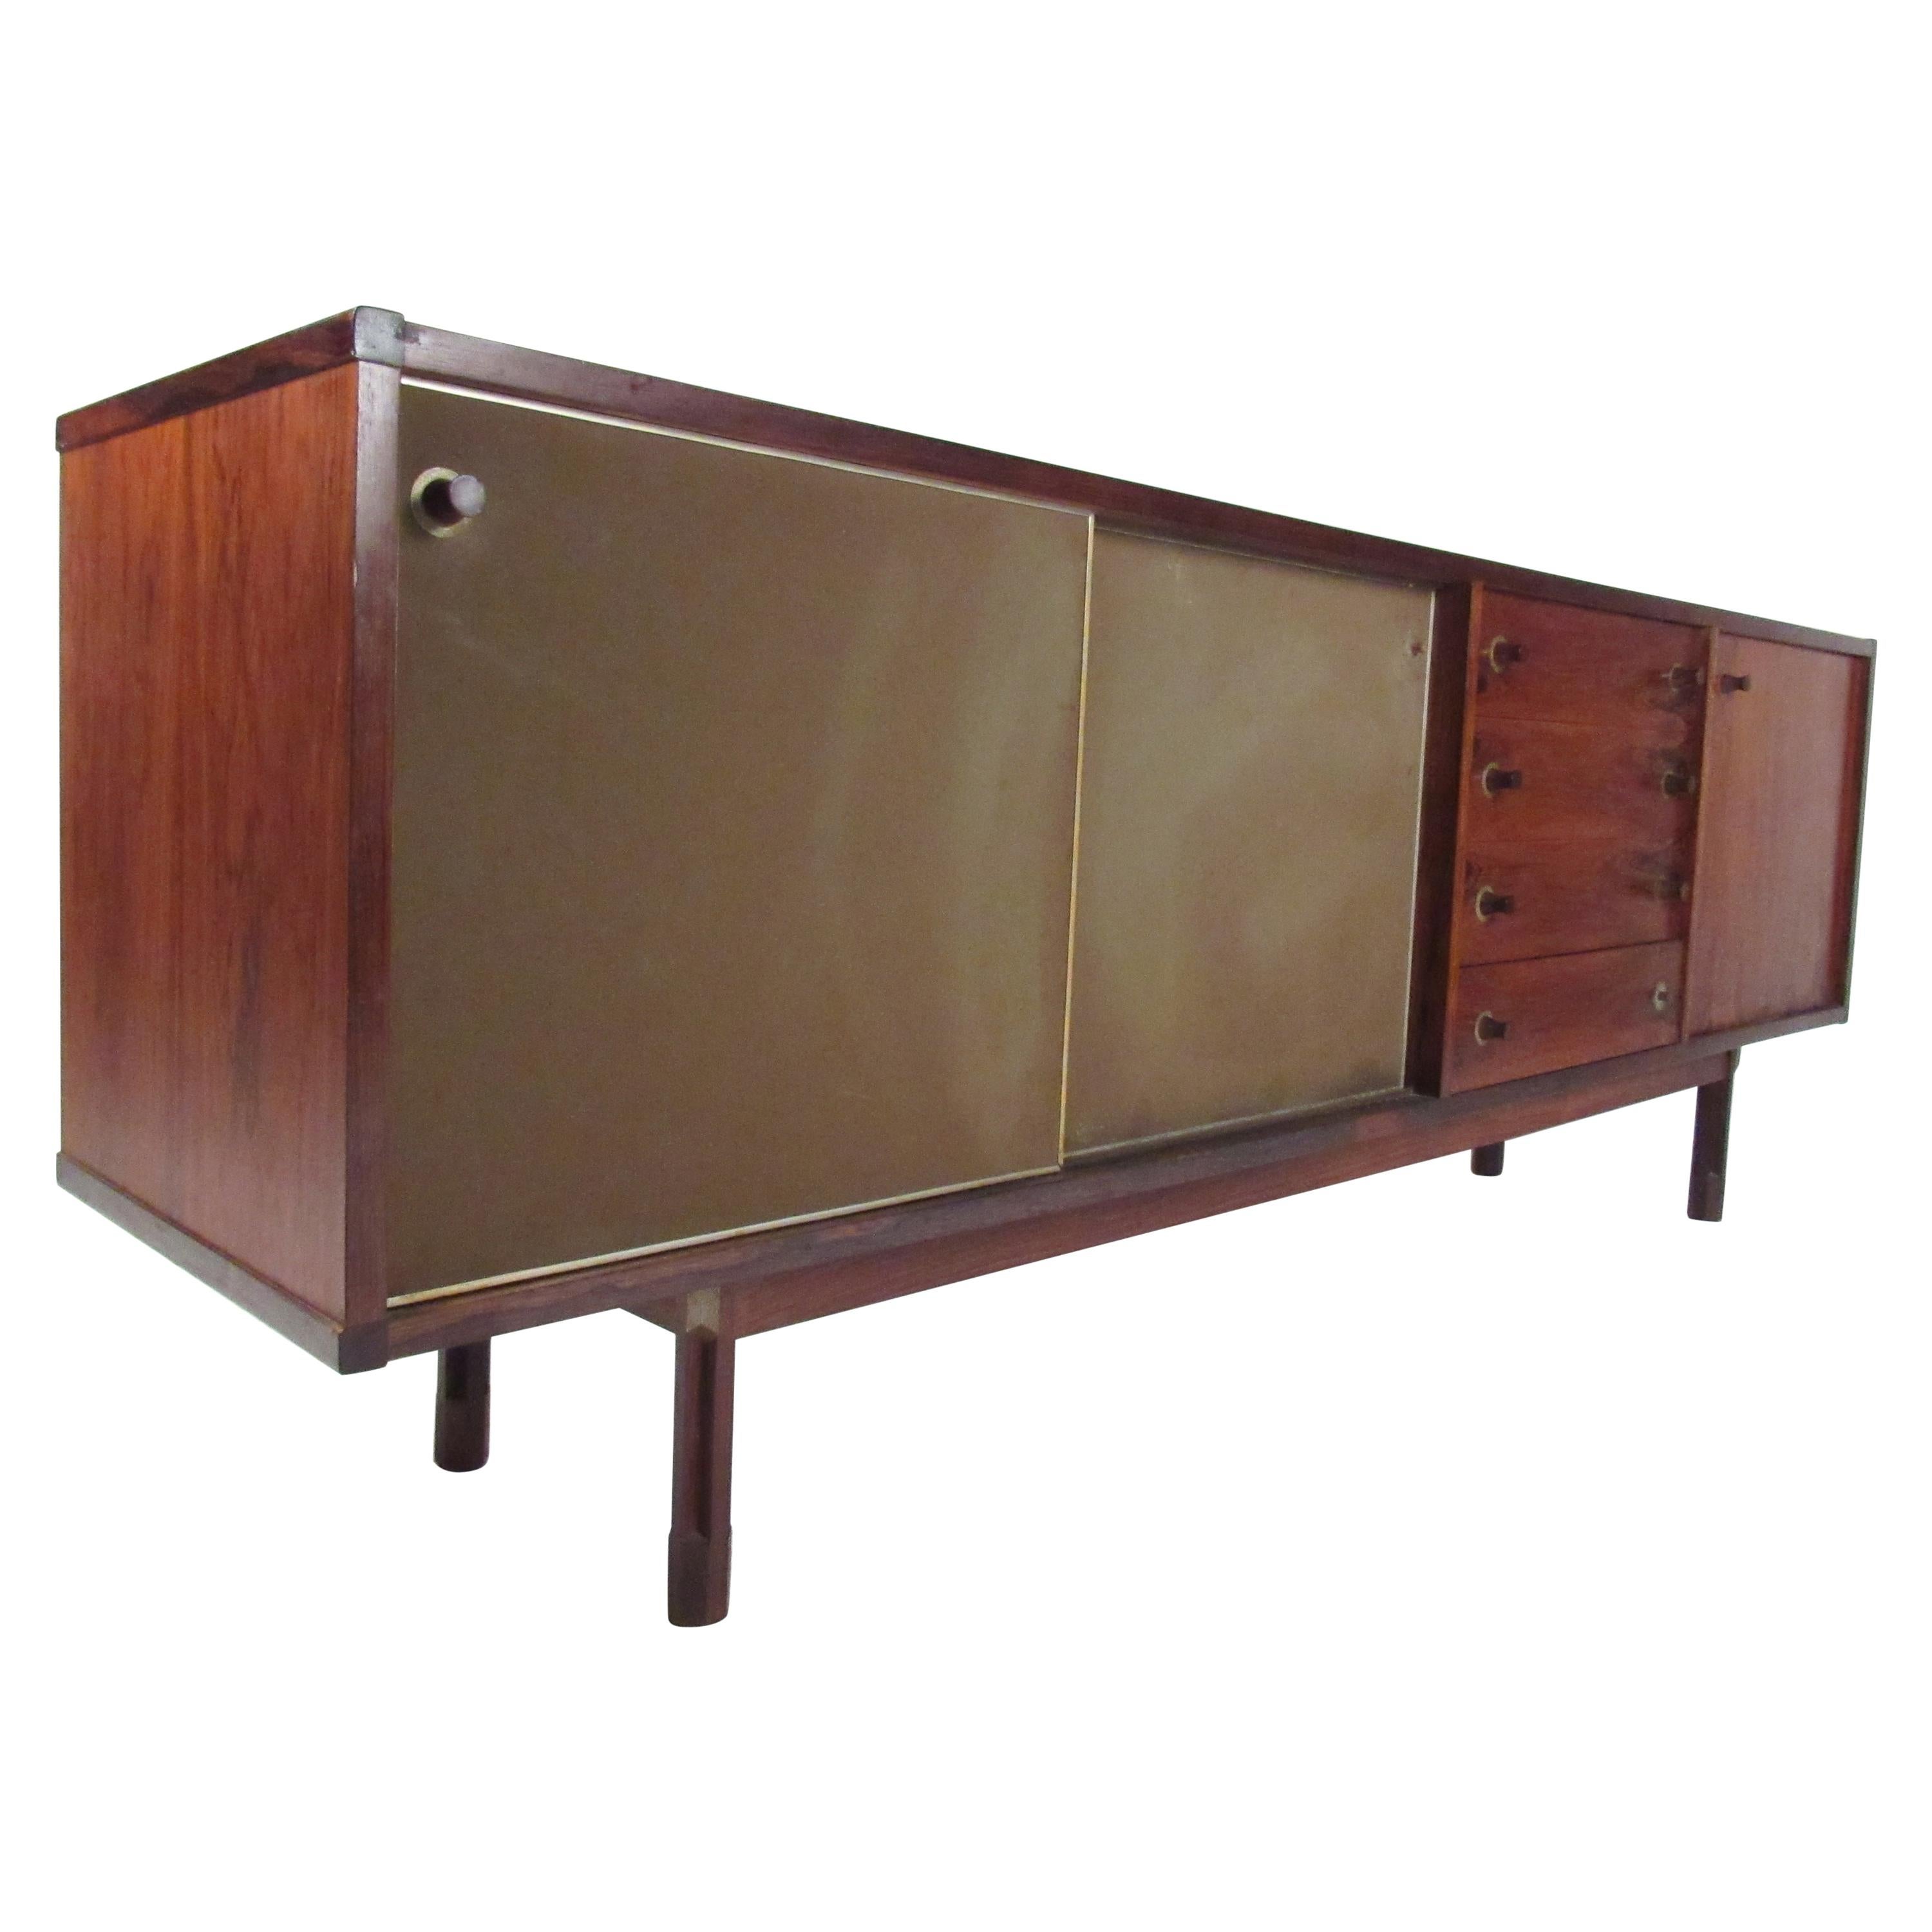 Italian Midcentury Credenza in Rosewood with a Finished Back